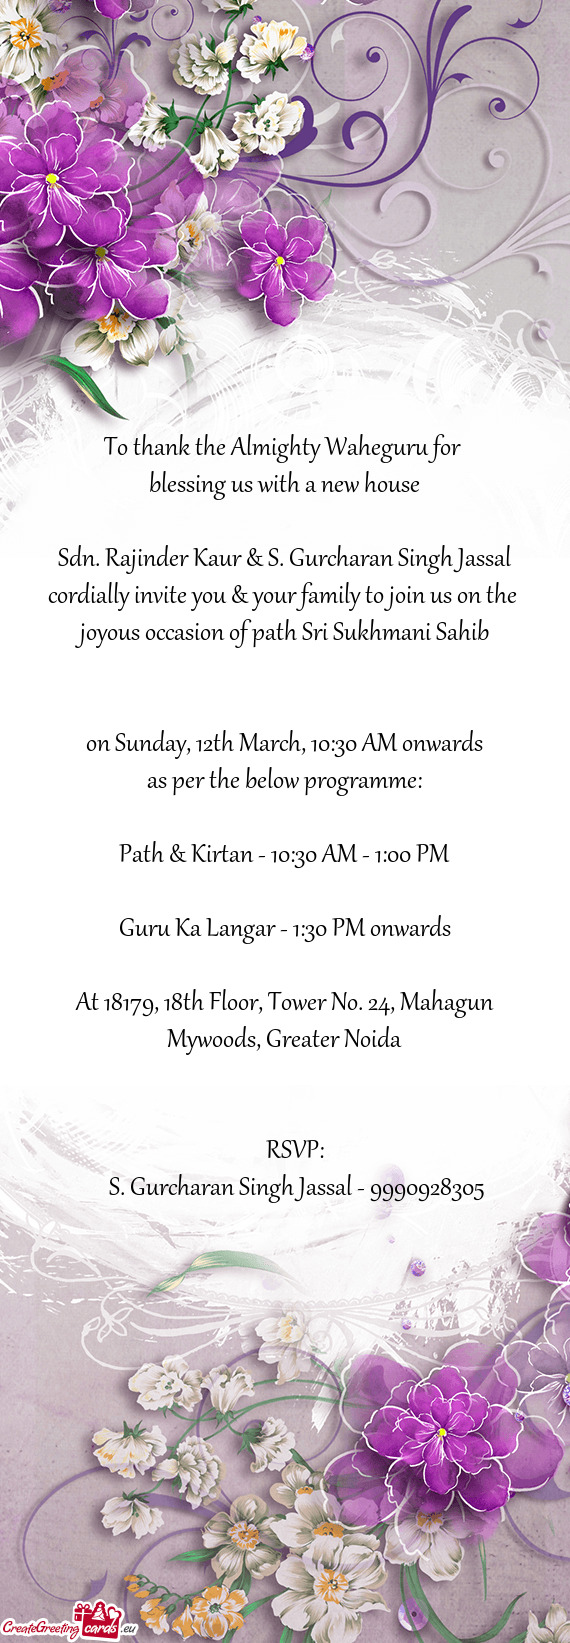 On Sunday, 12th March, 10:30 AM onwards